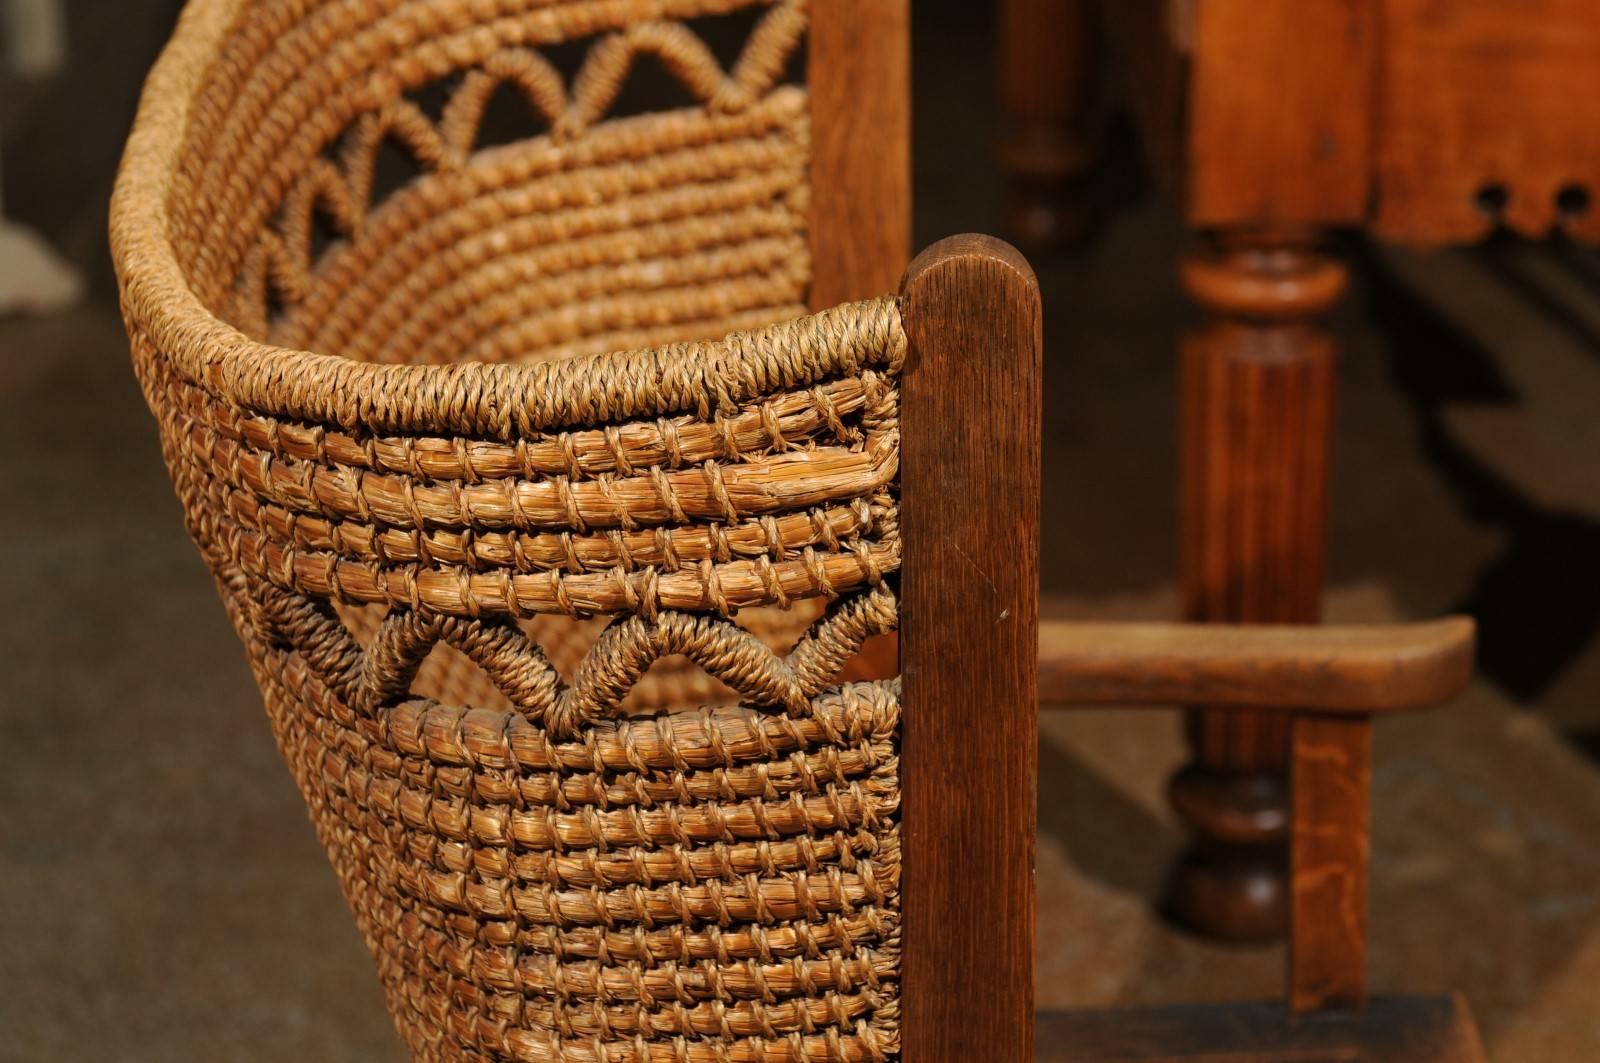 19th Century Scottish Orkney Chair with Handwoven Straw Back and Zigzag Patterns 2